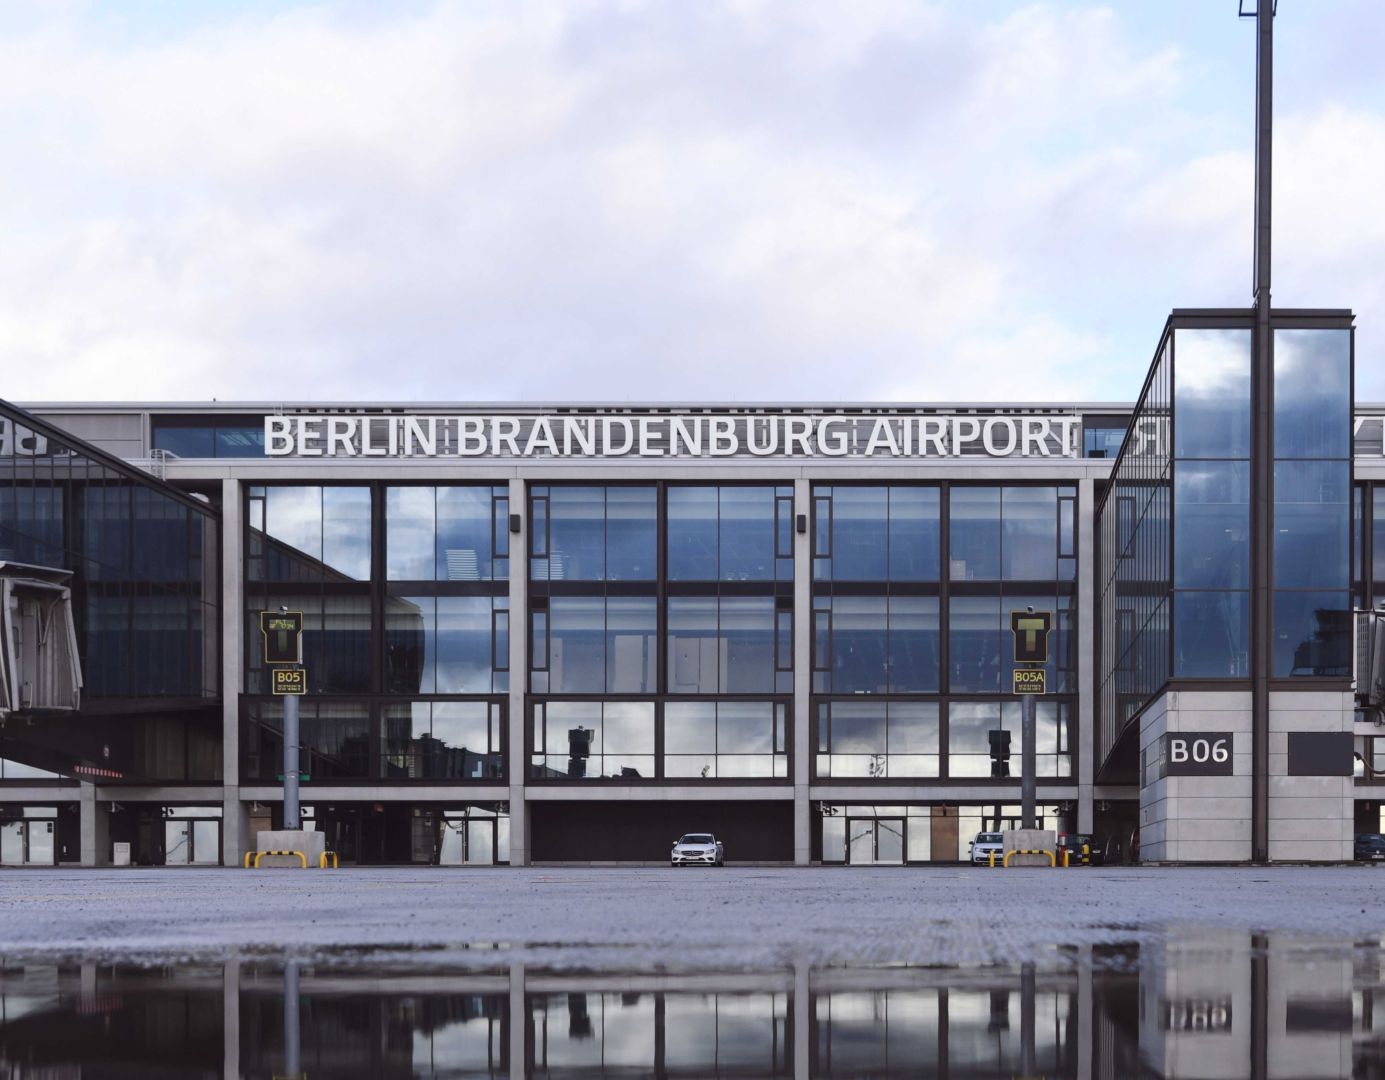 BER airport. Berlin’s new gateway to the world. | about.visitBerlin.de